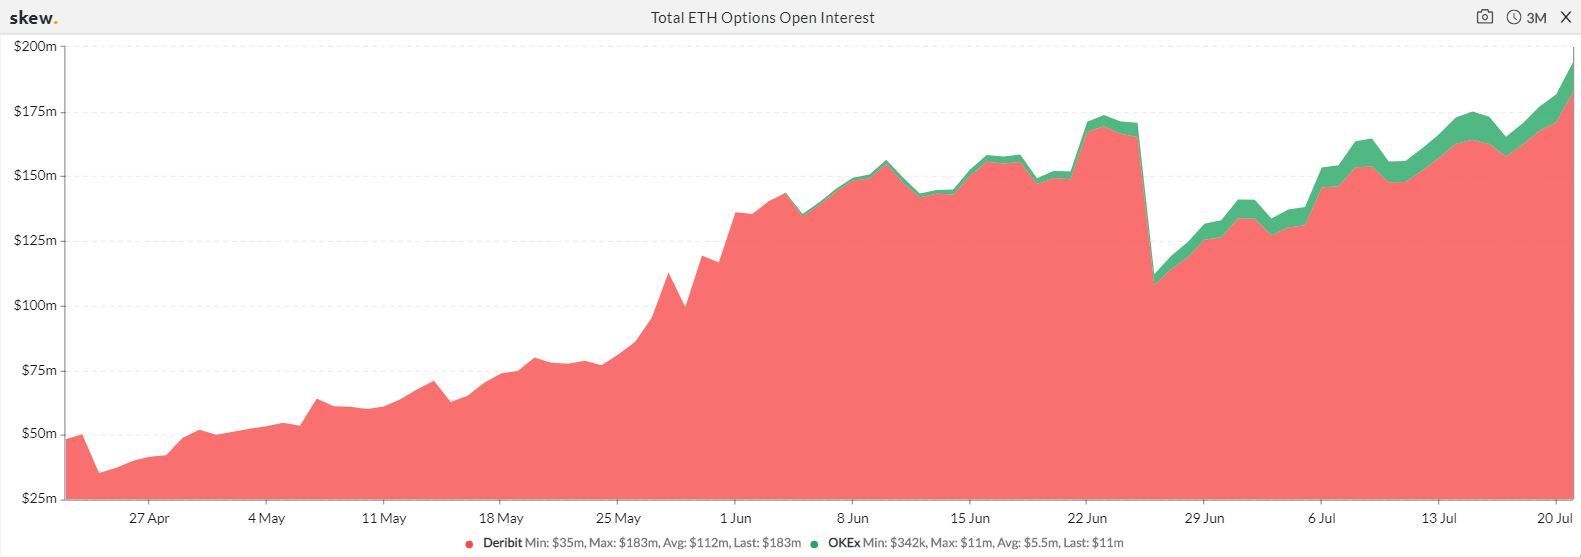 Open-interest-in-ether-options-jumps-to-new-record-high